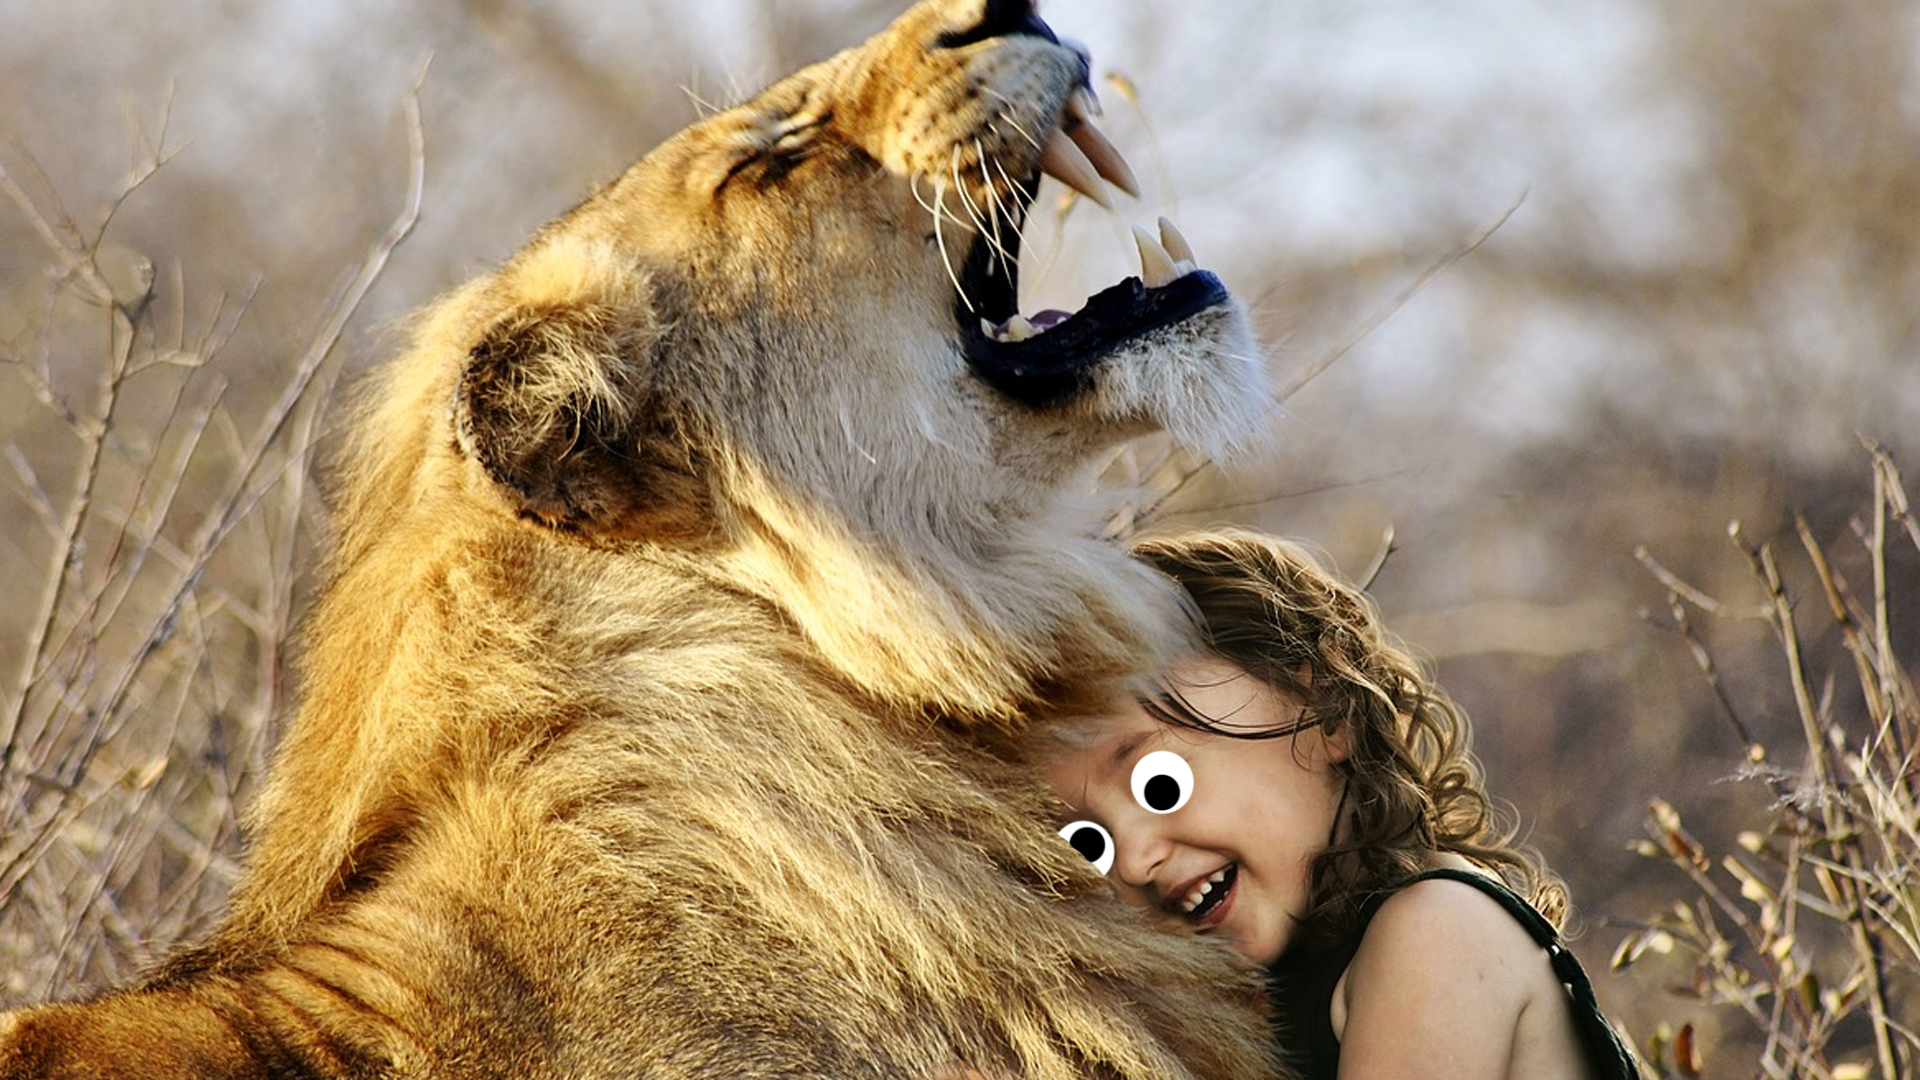 A child and their BBF, which happens to be a lion